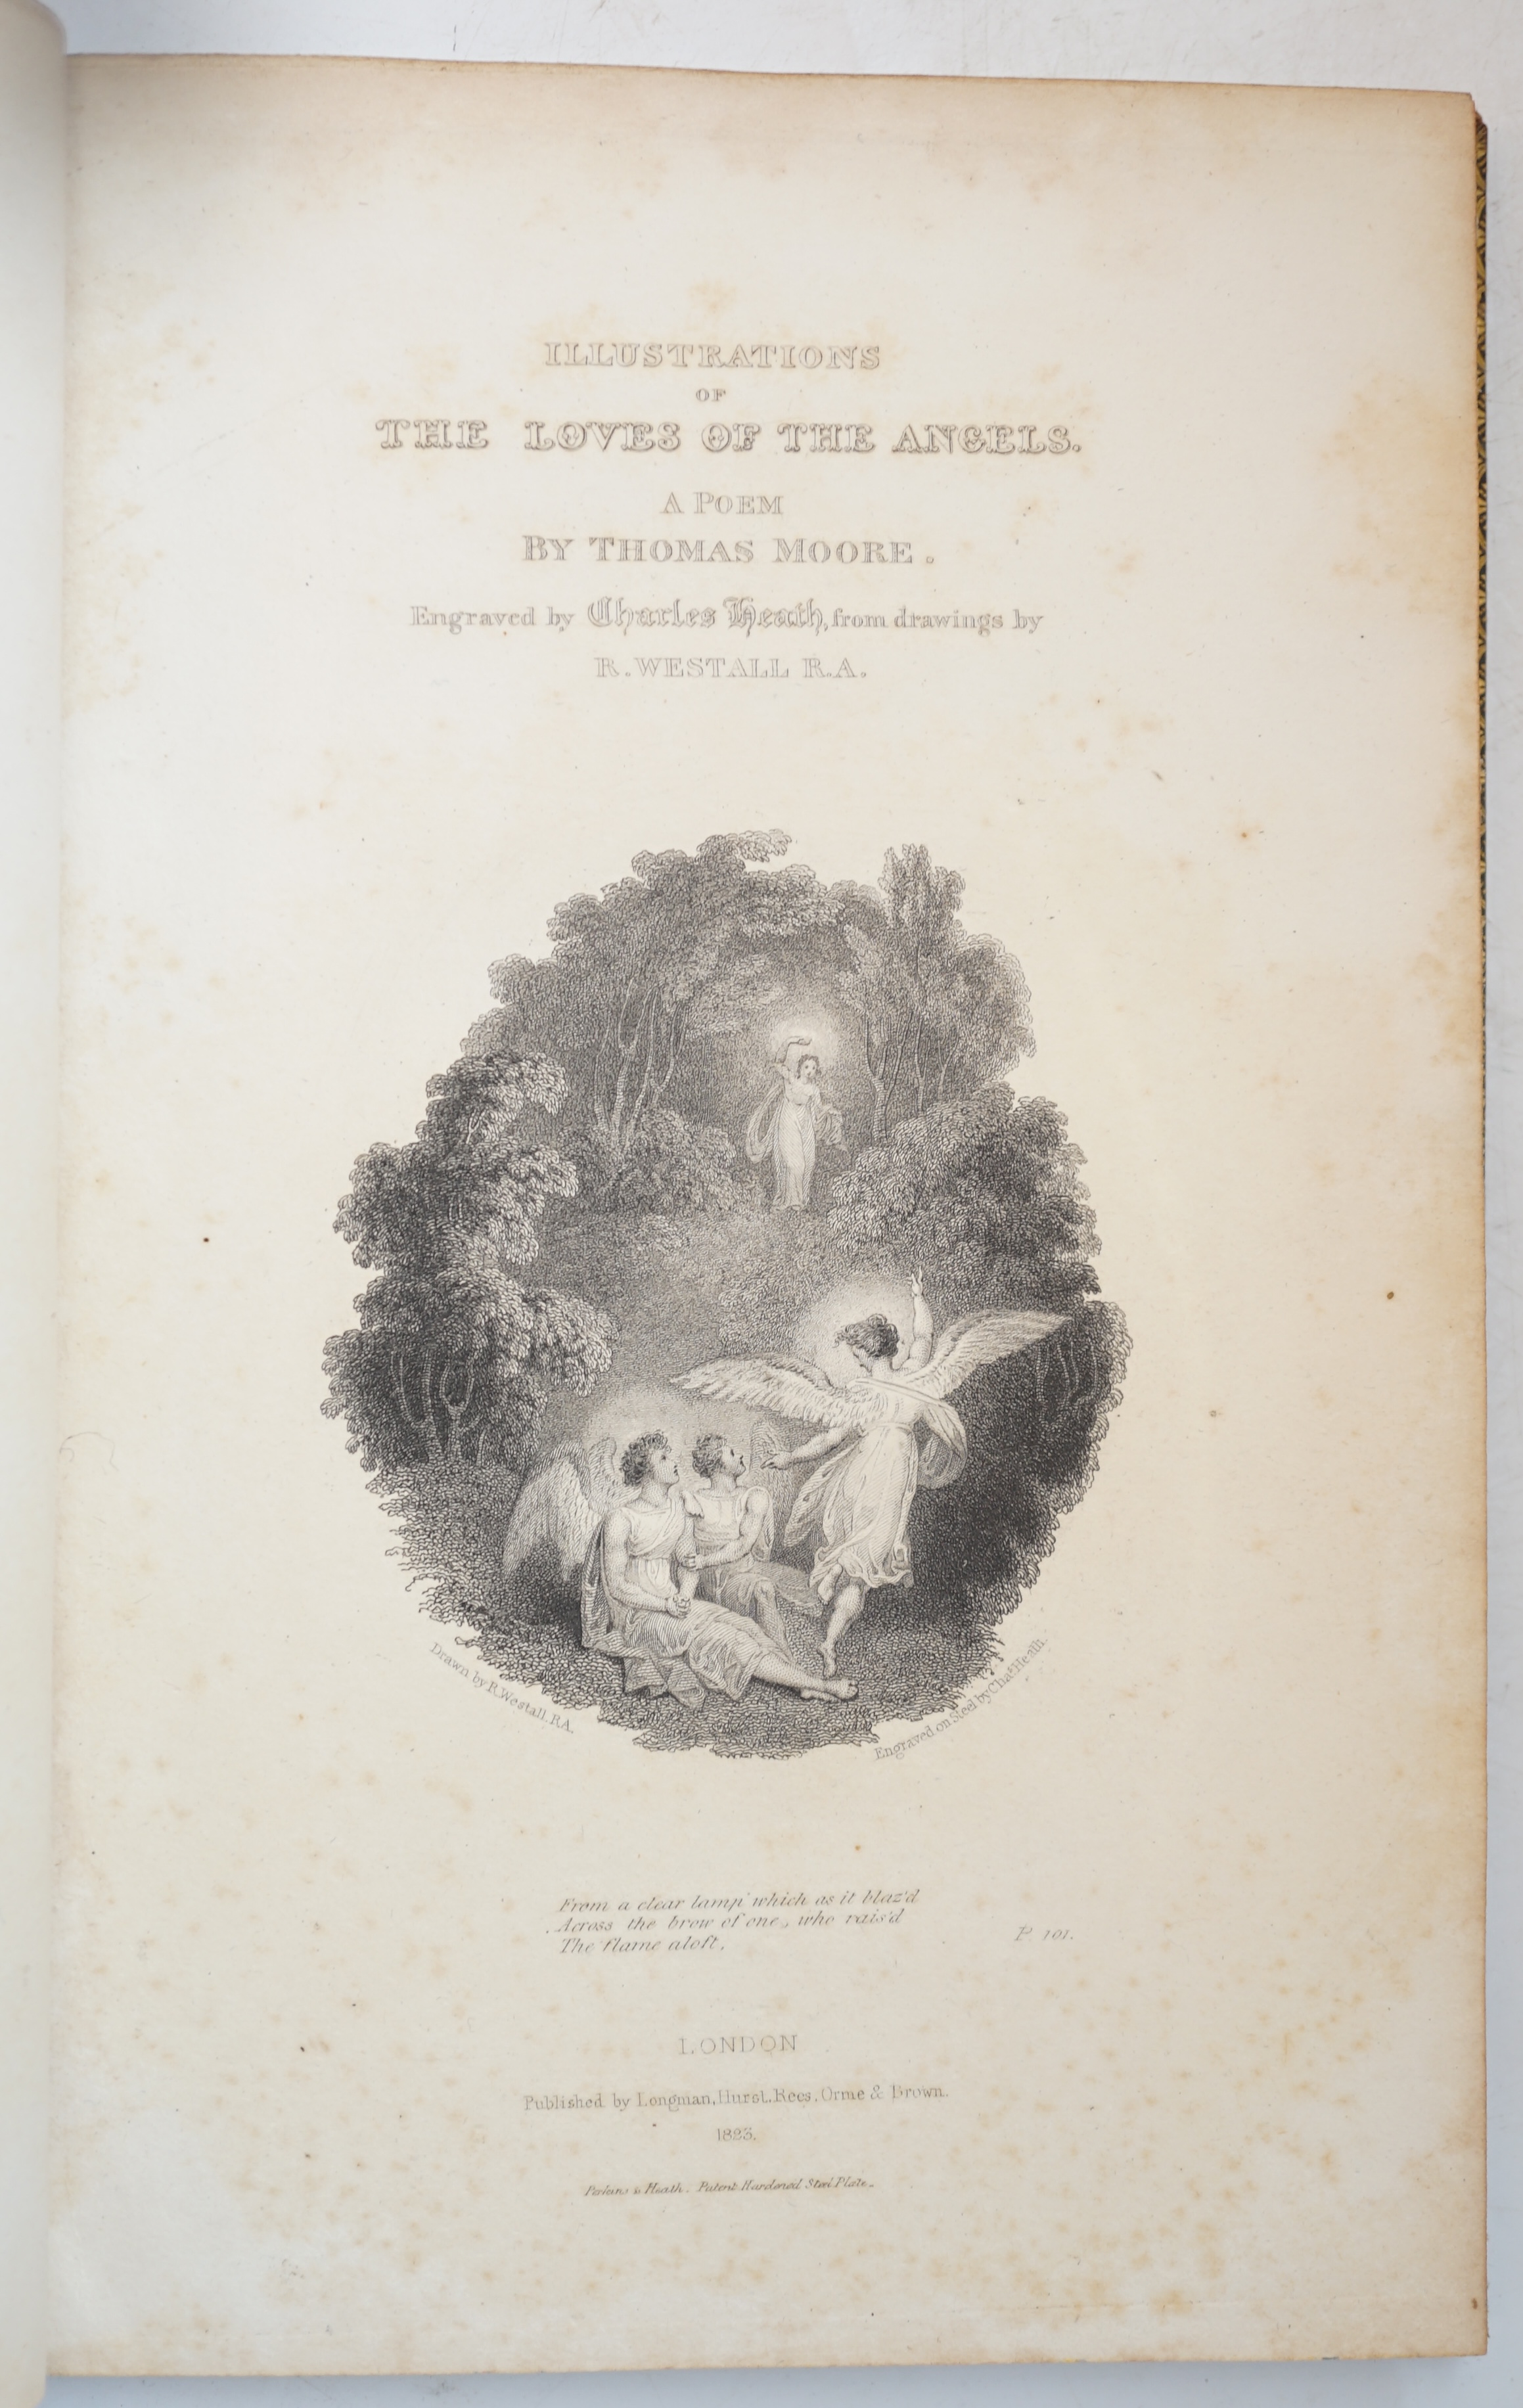 Moore, Thomas - Illustrations of The Love of the Angels, with 4 engraved plates after Richard Westall, 8vo, green morocco gilt, half title and vignette engraved addition title, Longman et al, London, 1823.